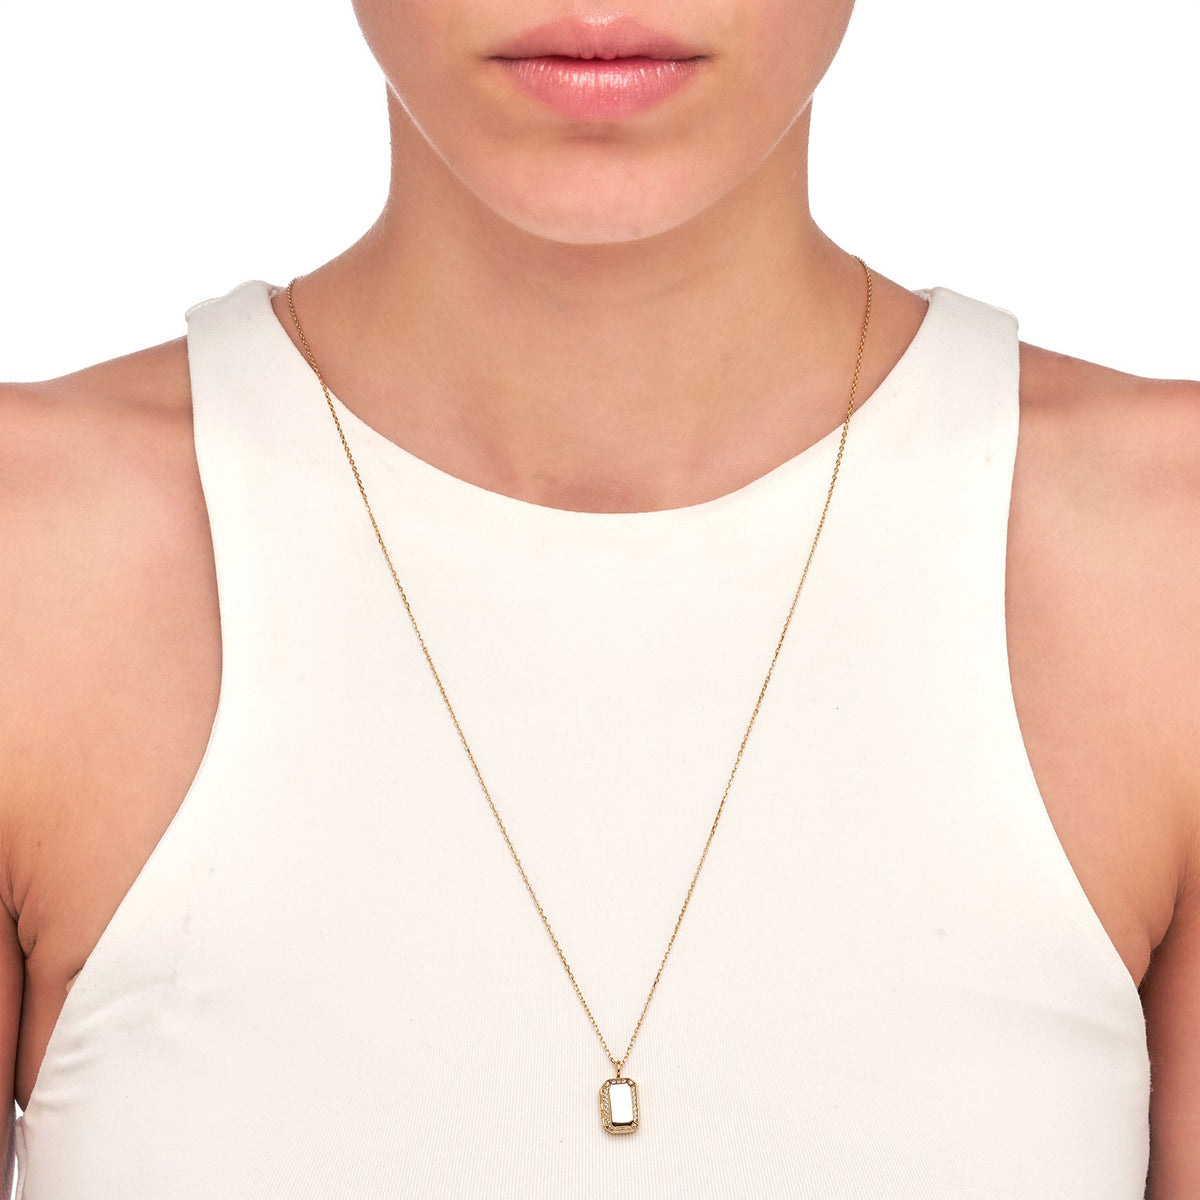 Cybele | Plantain Necklace | White CZ | 14K Gold Plated 925 Silver